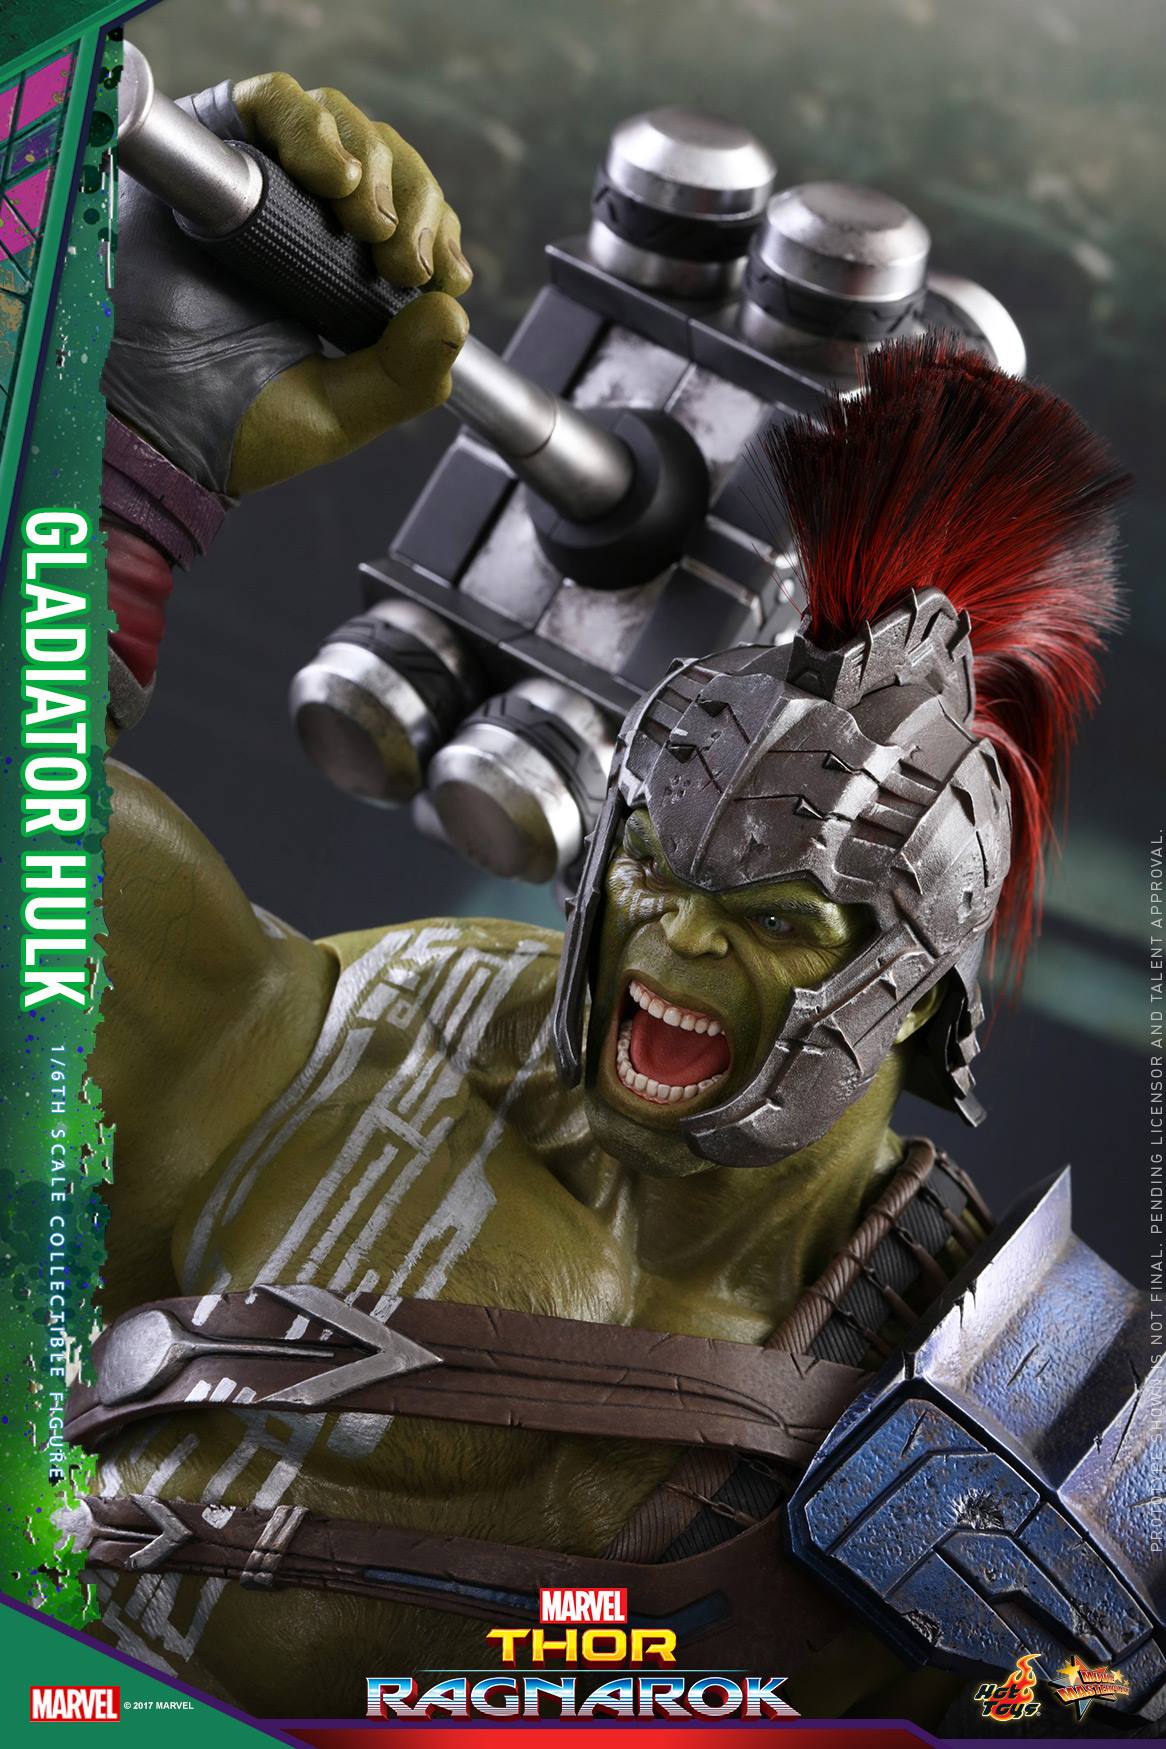 Hot Toys Gladiator Hulk Sixth Scale Figure Up for Order! - Marvel Toy News